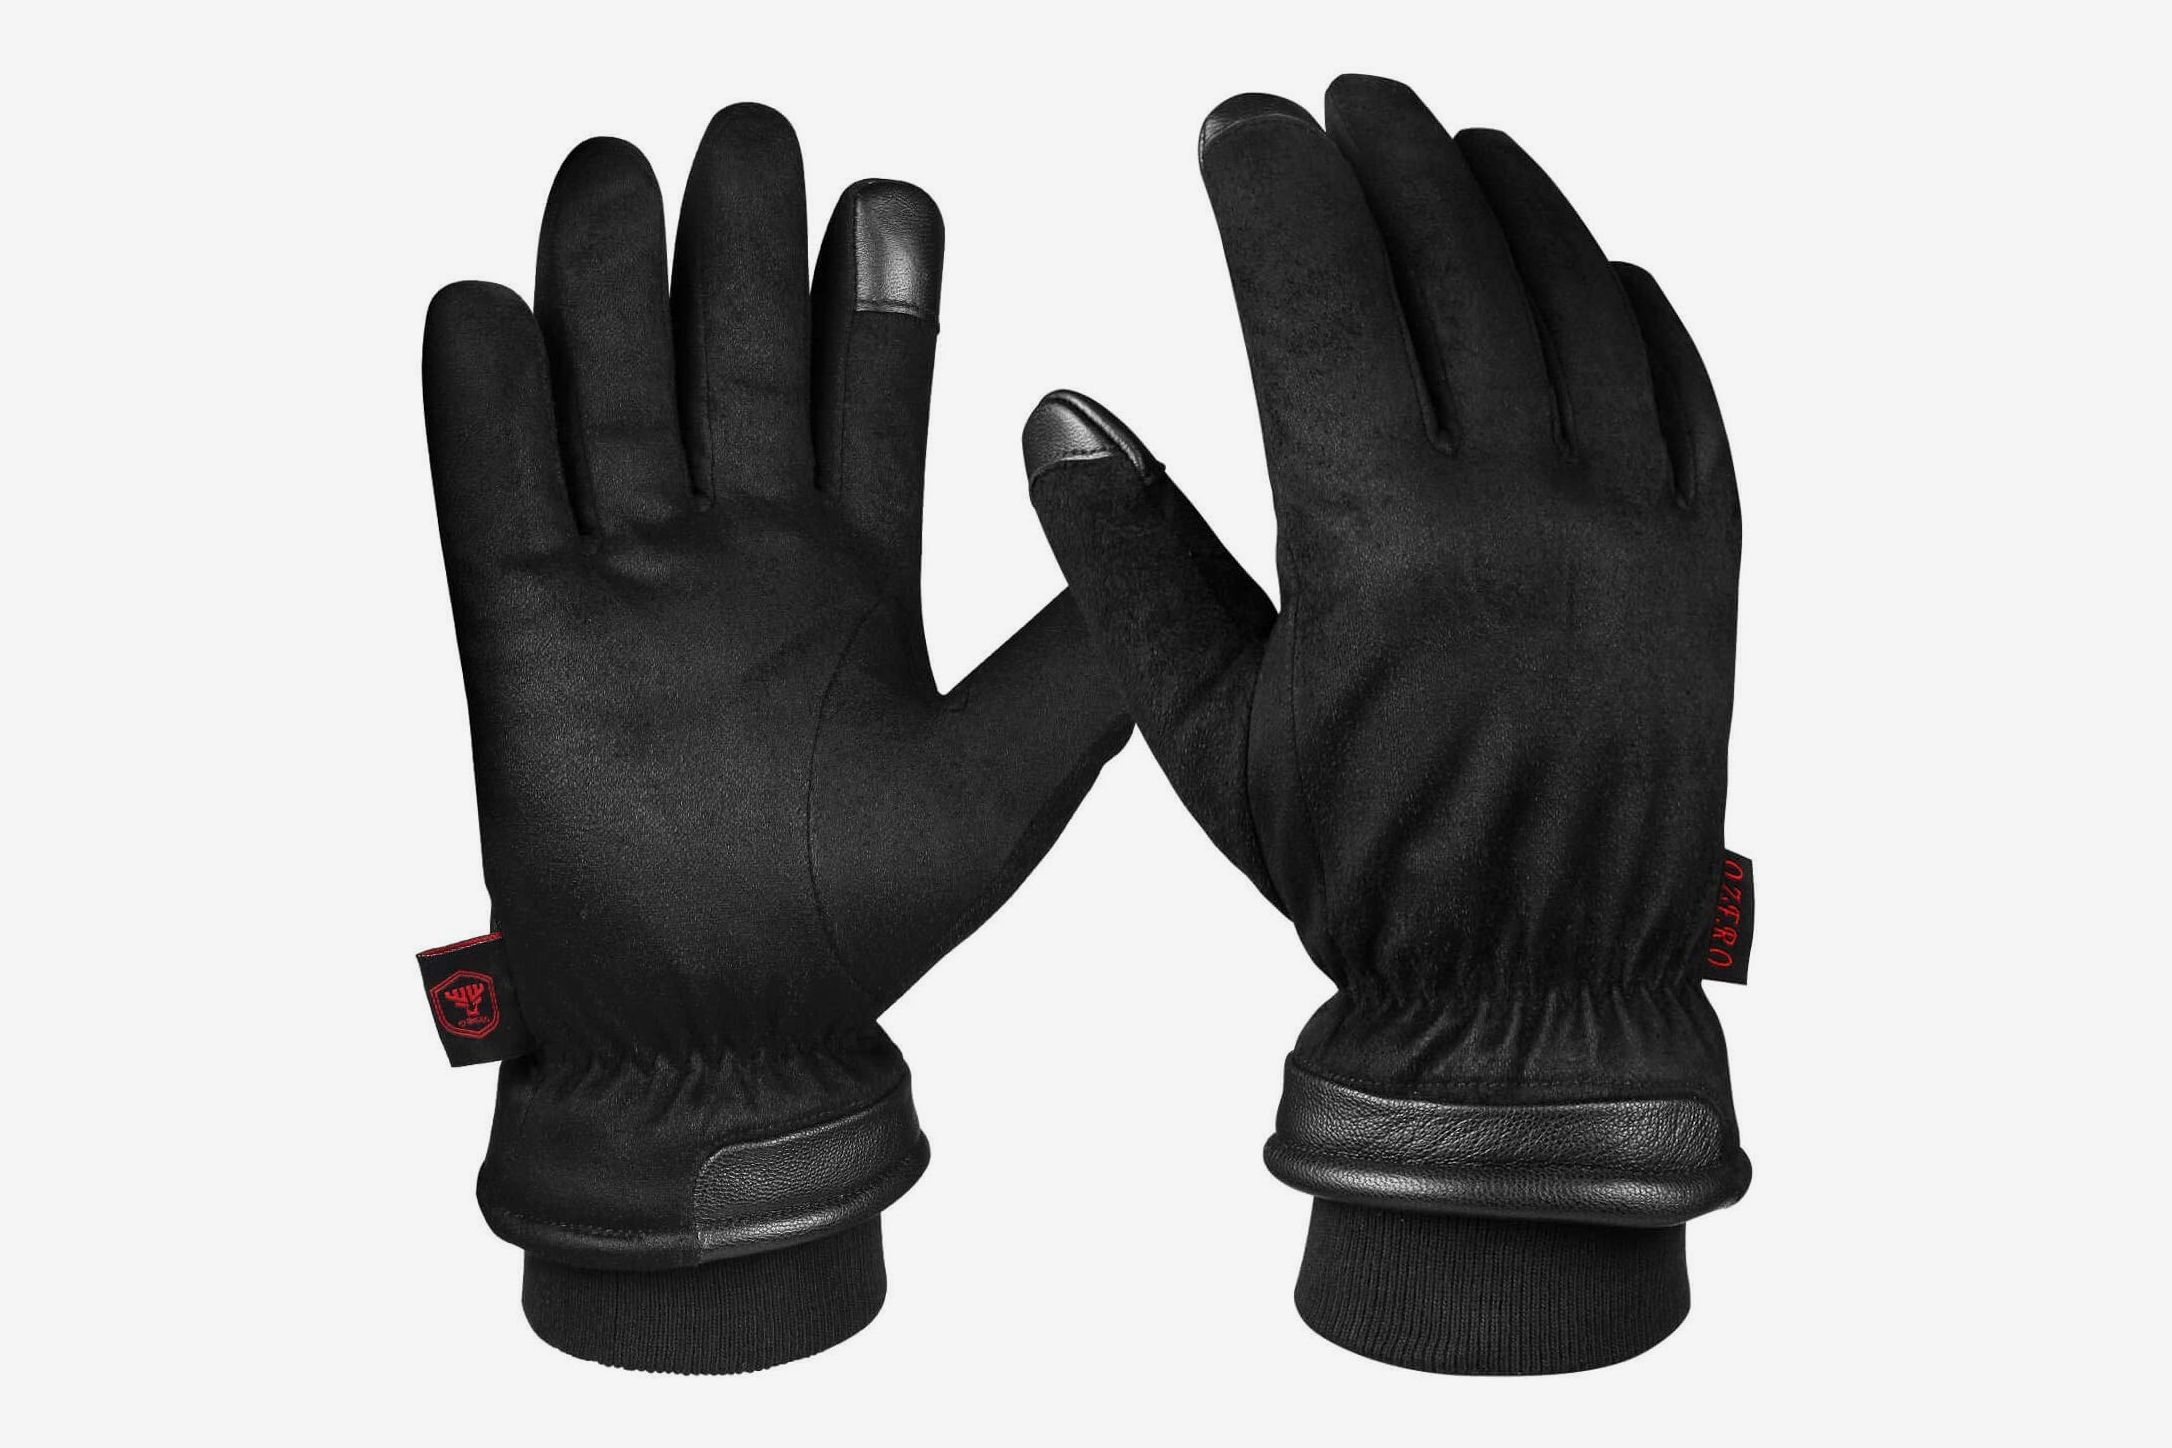 Mens Winter Waterproof Insulated Warm Gloves With Touch Screen Fingers for Phone 